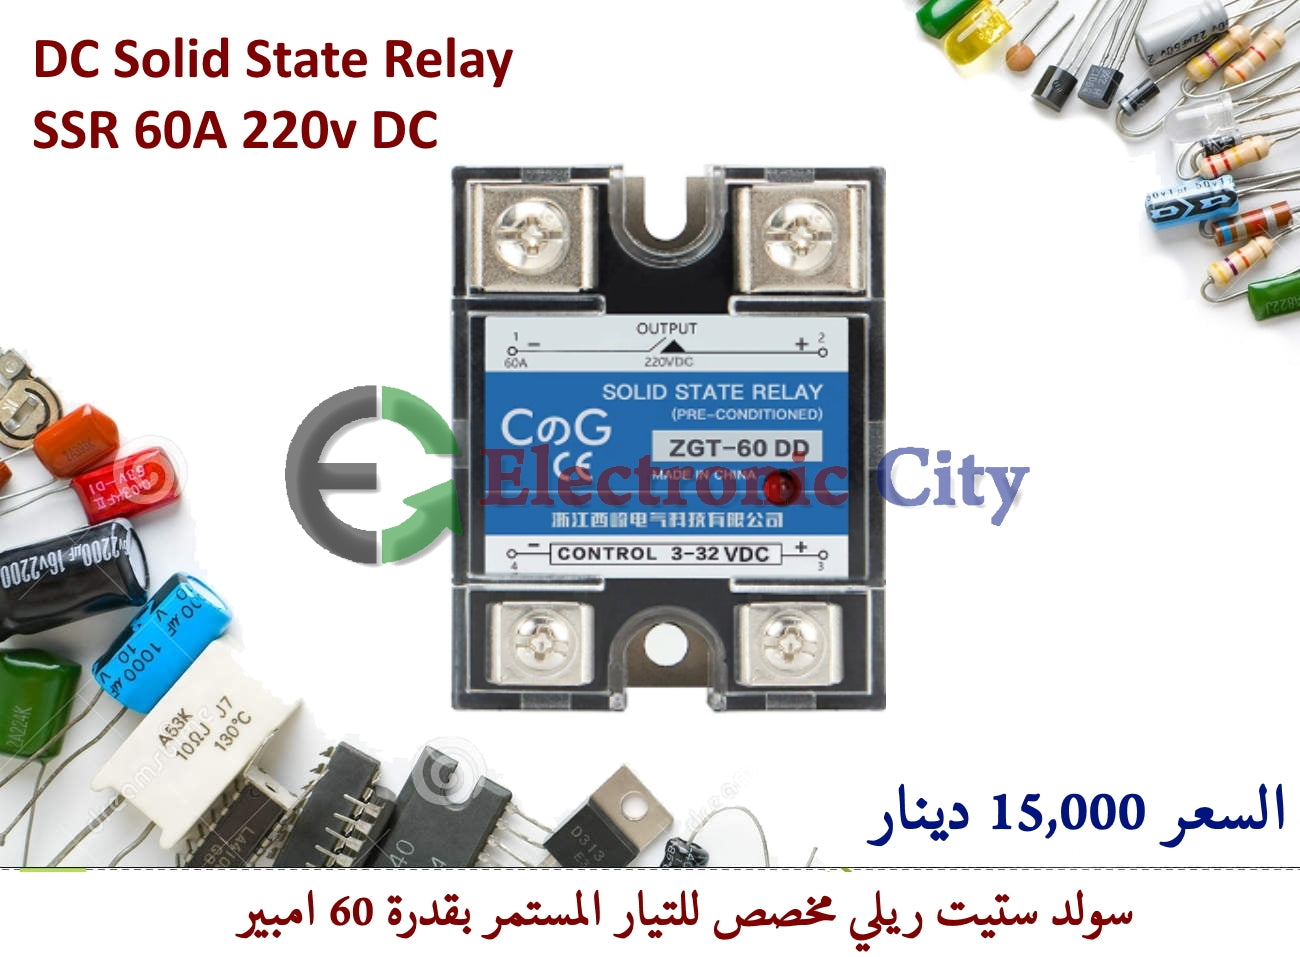 DC Solid State Relay  SSR 60A 220v DC